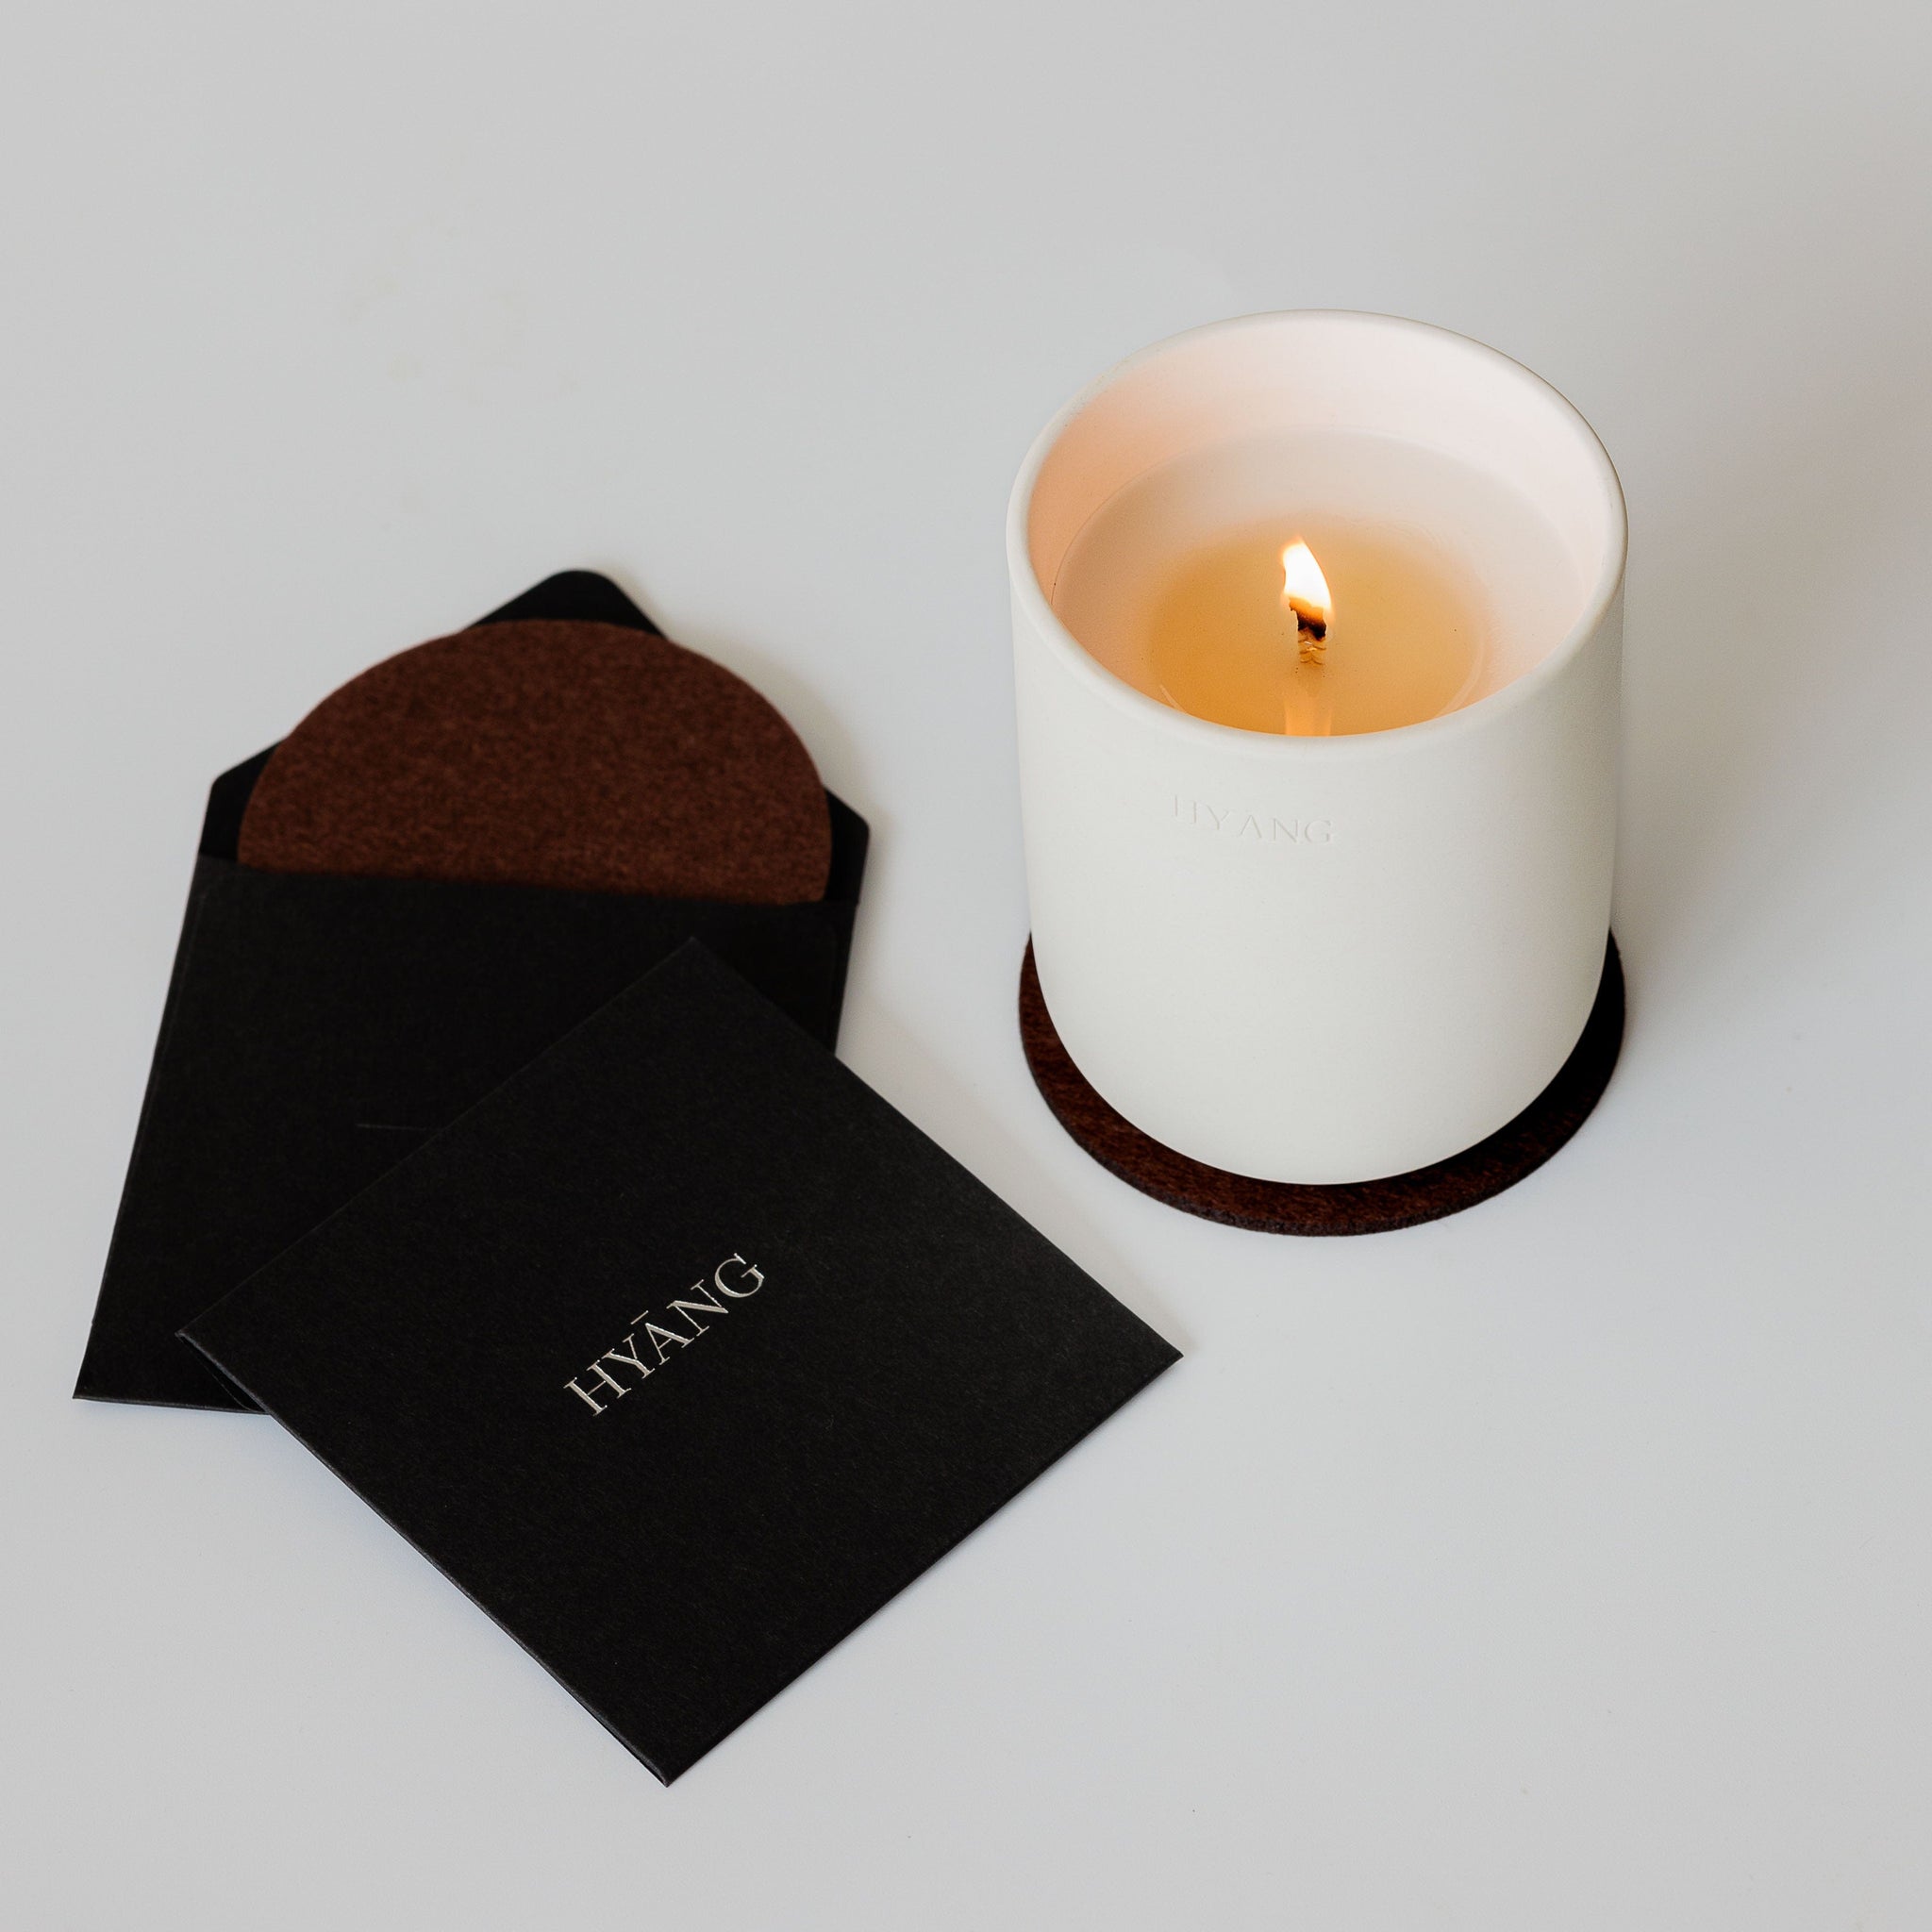 HYANG STUDIO Candles CANDLE 02 - The Wooden Chalet (Amber & Alpine Oak)